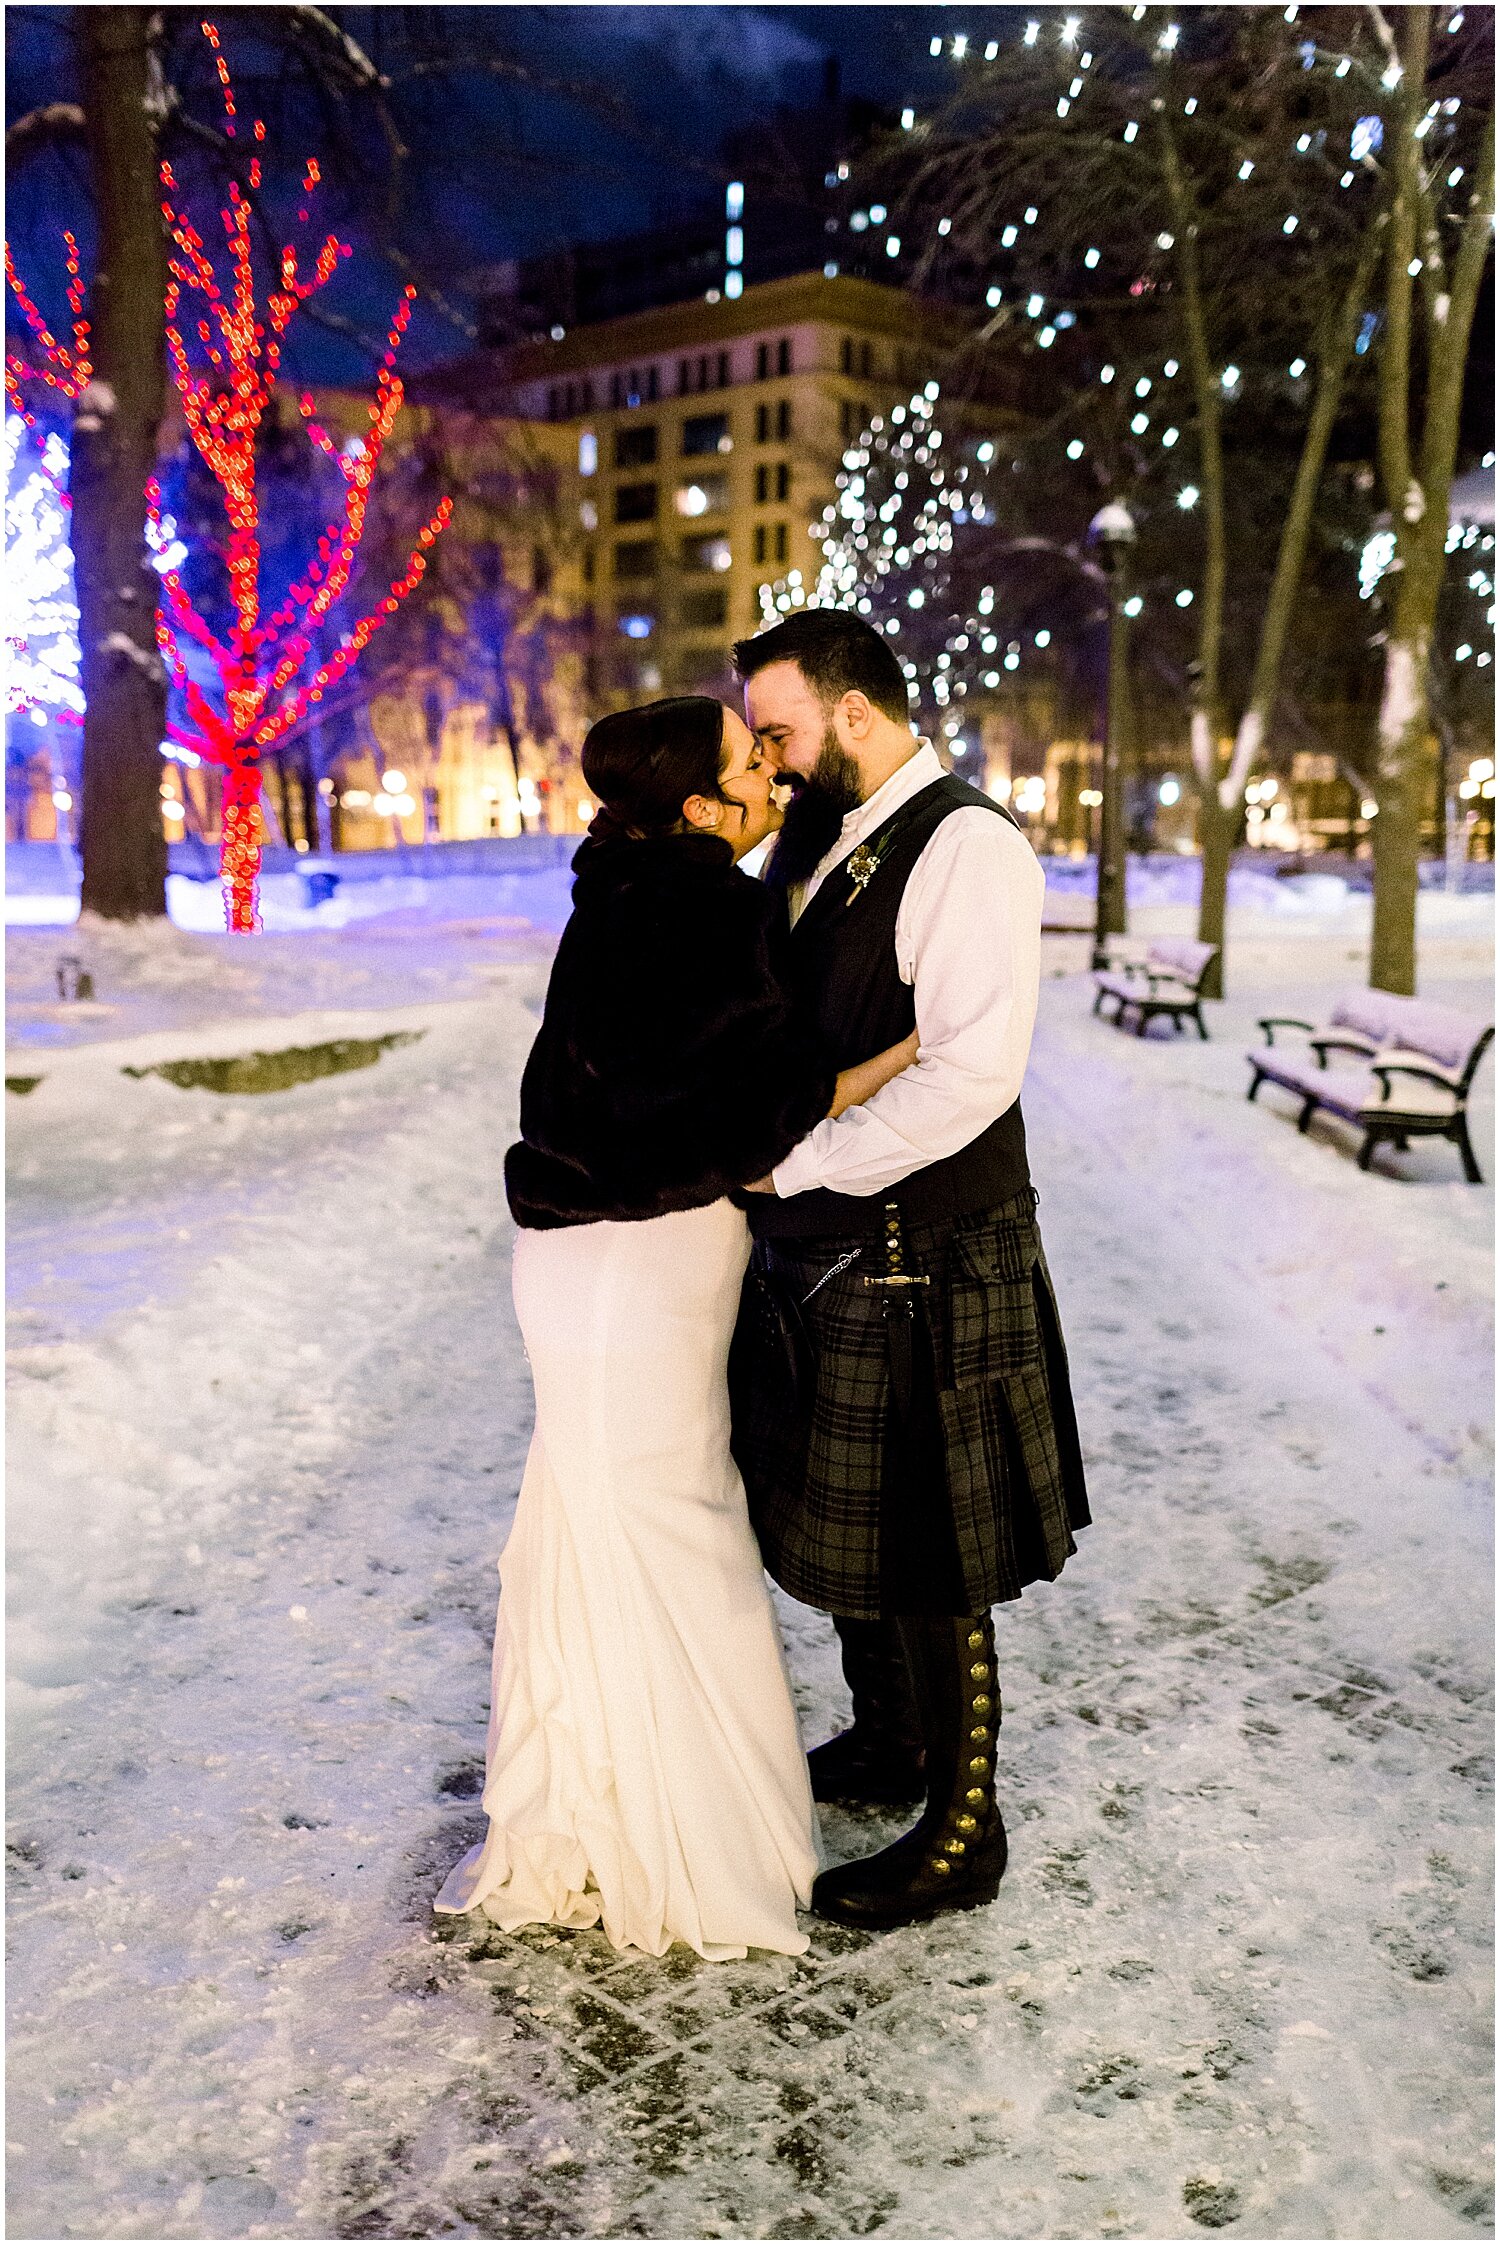  bride and groom kiss during the snowy weather 